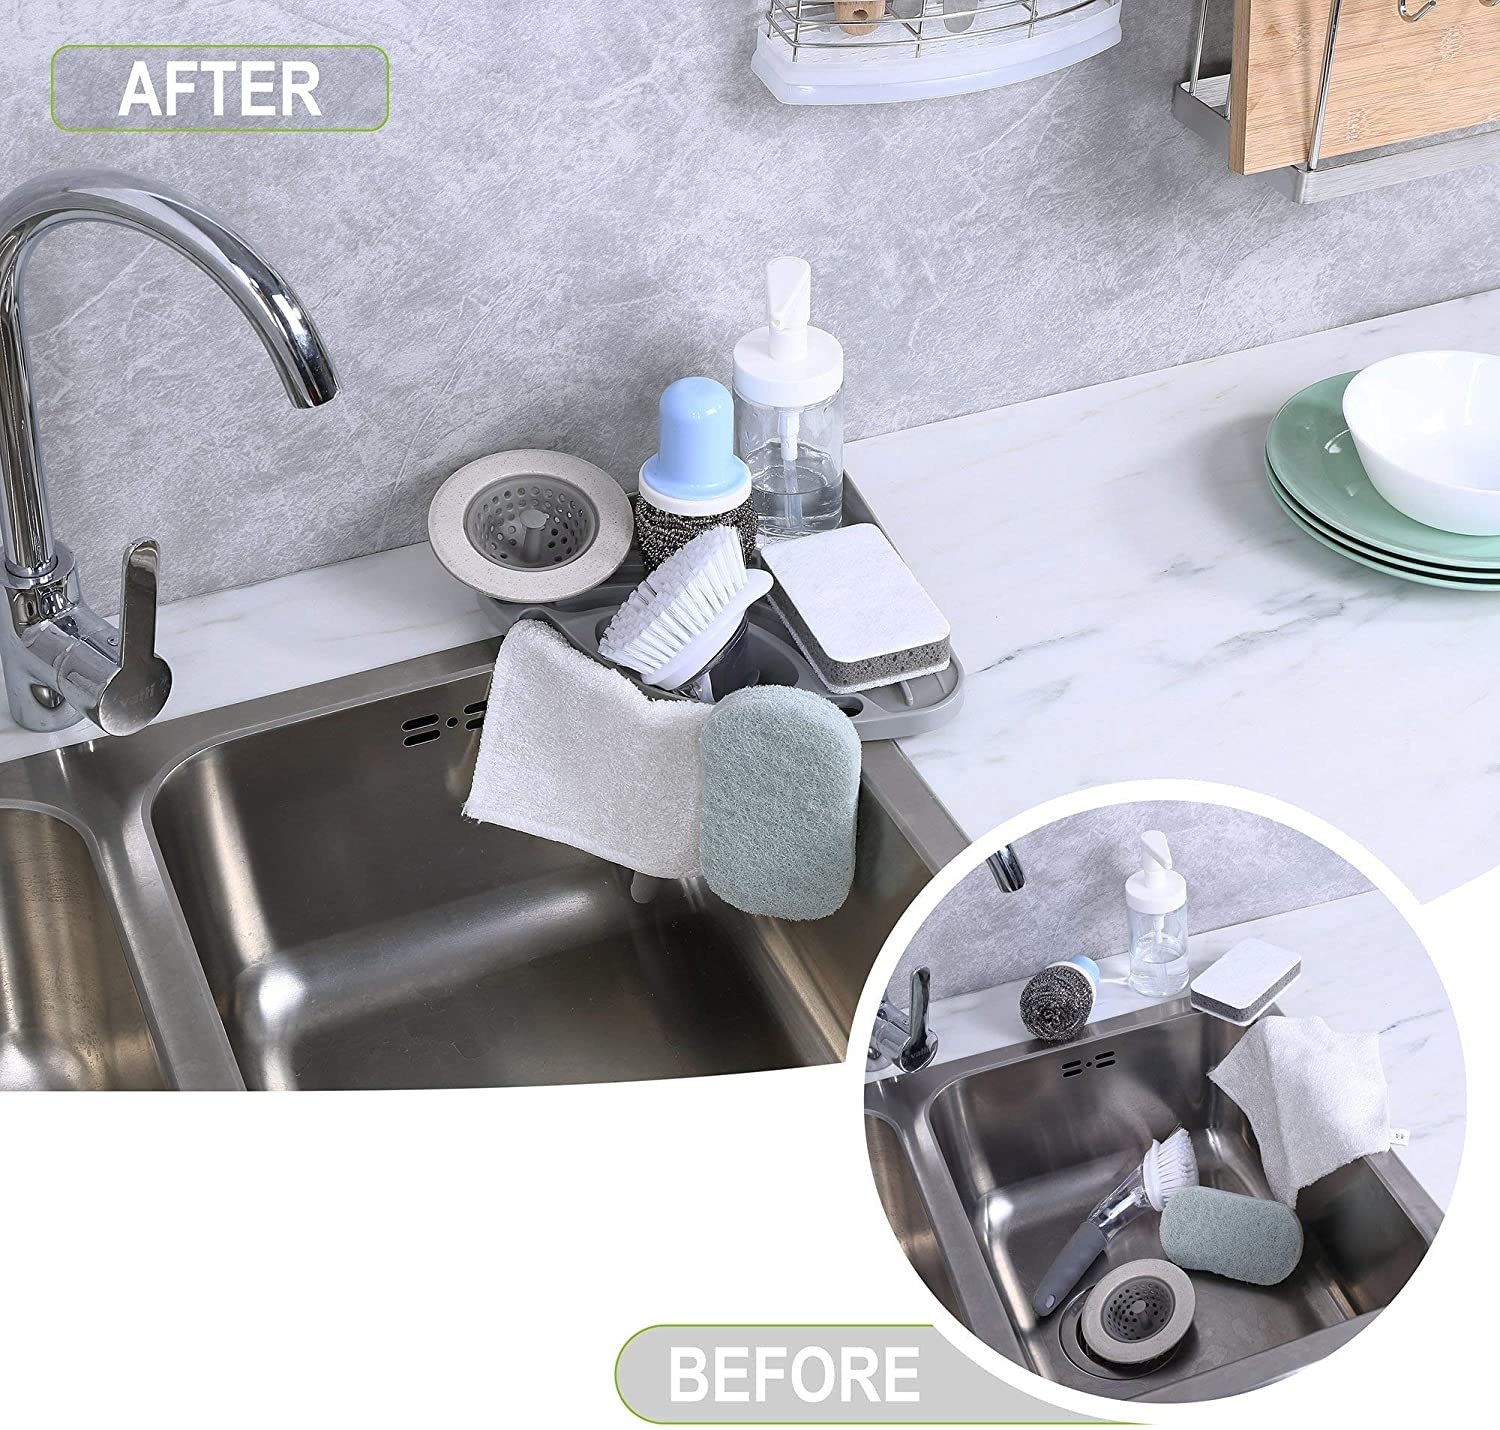 before of messy sink, then after with the organizer with everything very organized